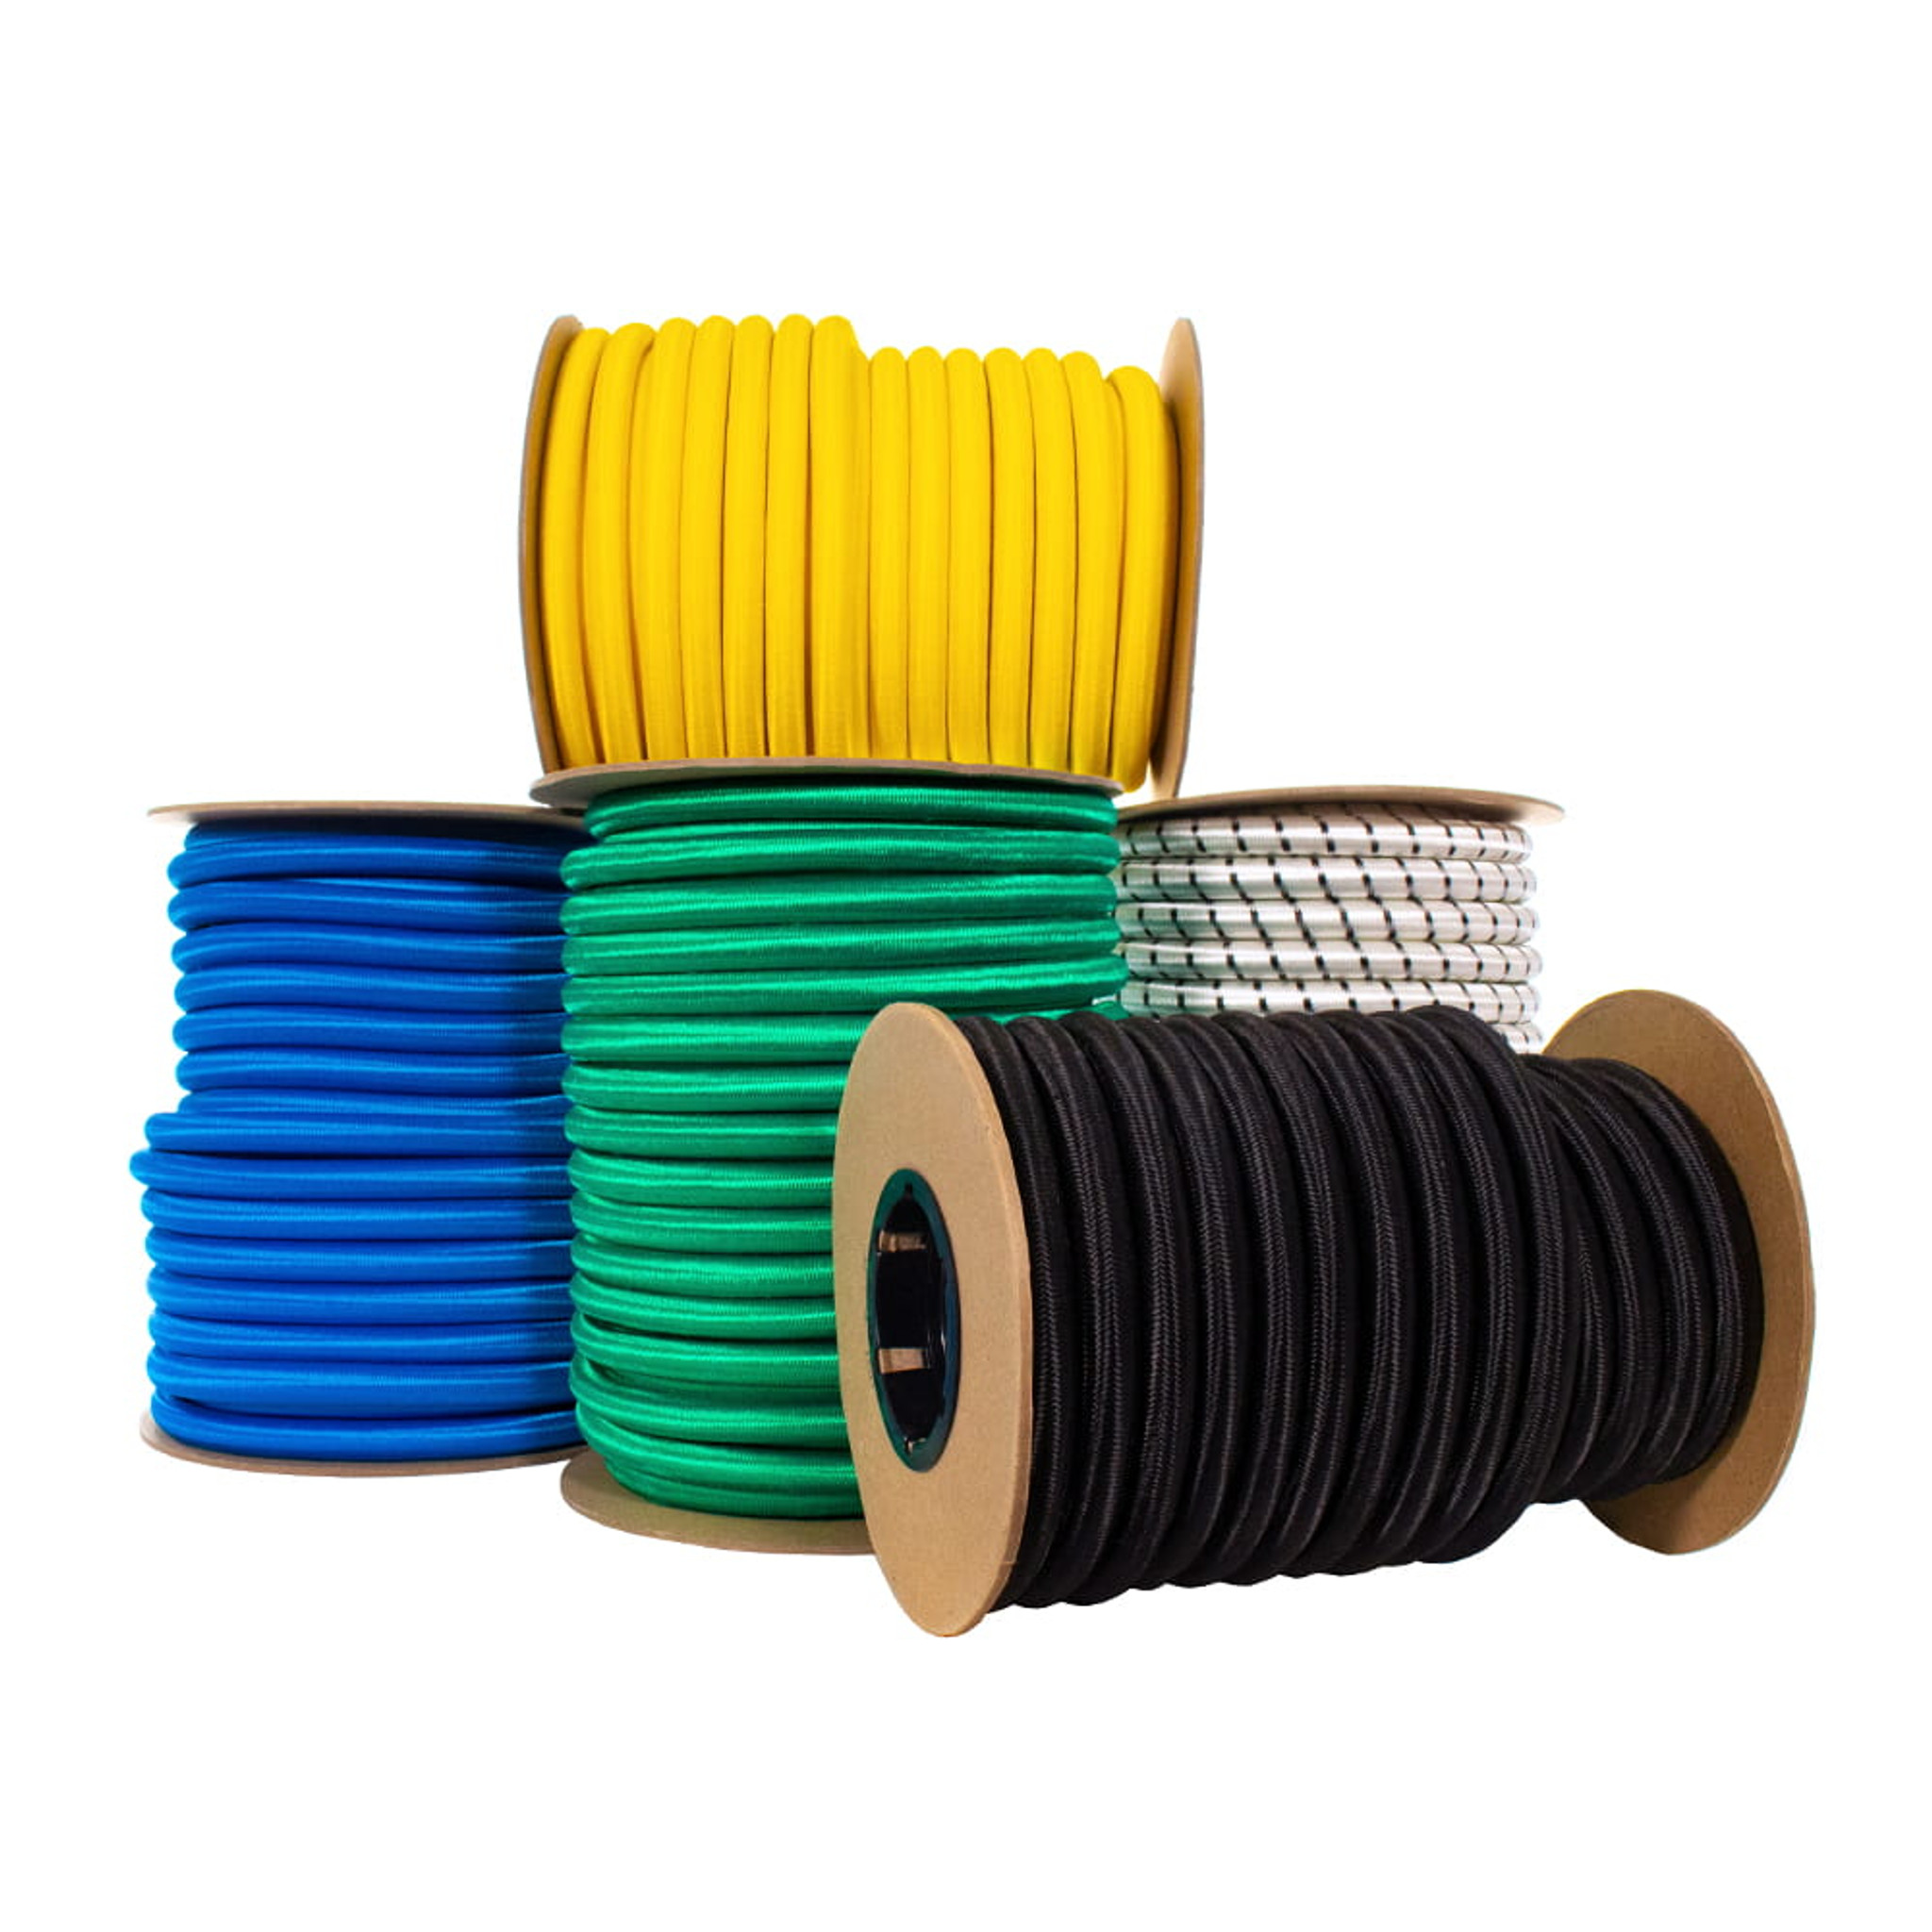 Elastic cord - Rope - Ropes - Products